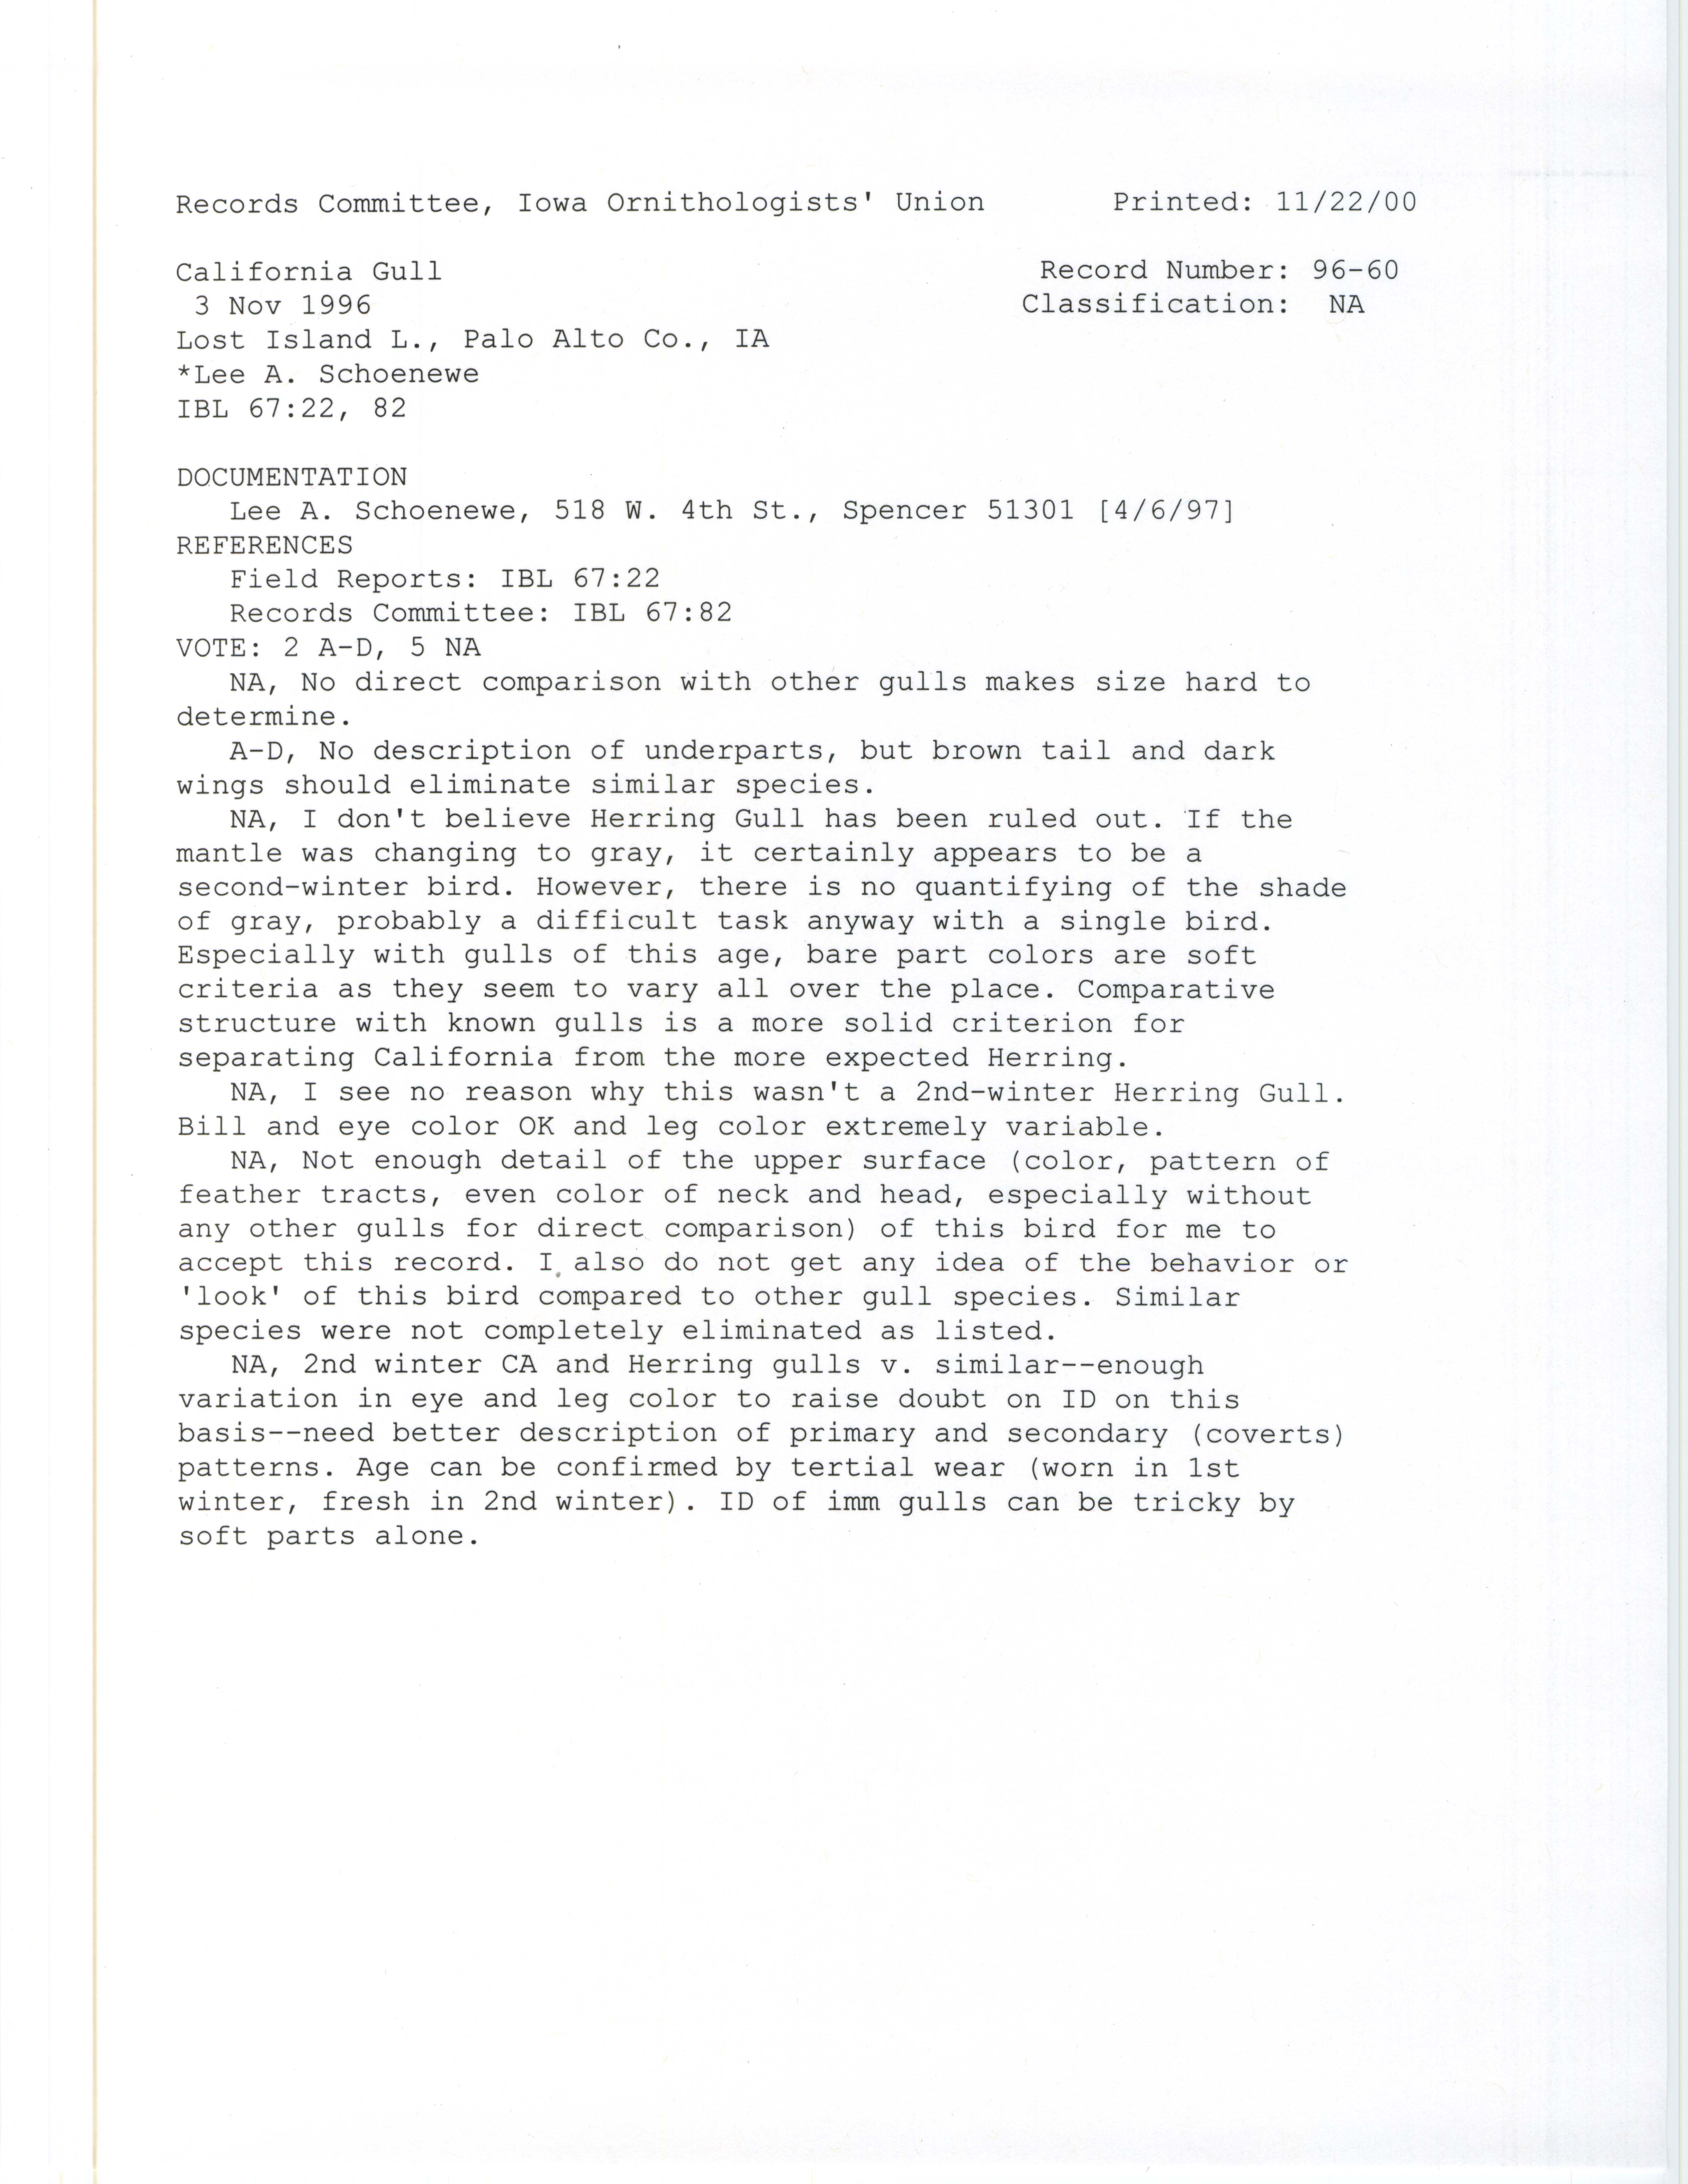 Records Committee review for rare bird sighting of California Gull at Lost Island Lake, 1996